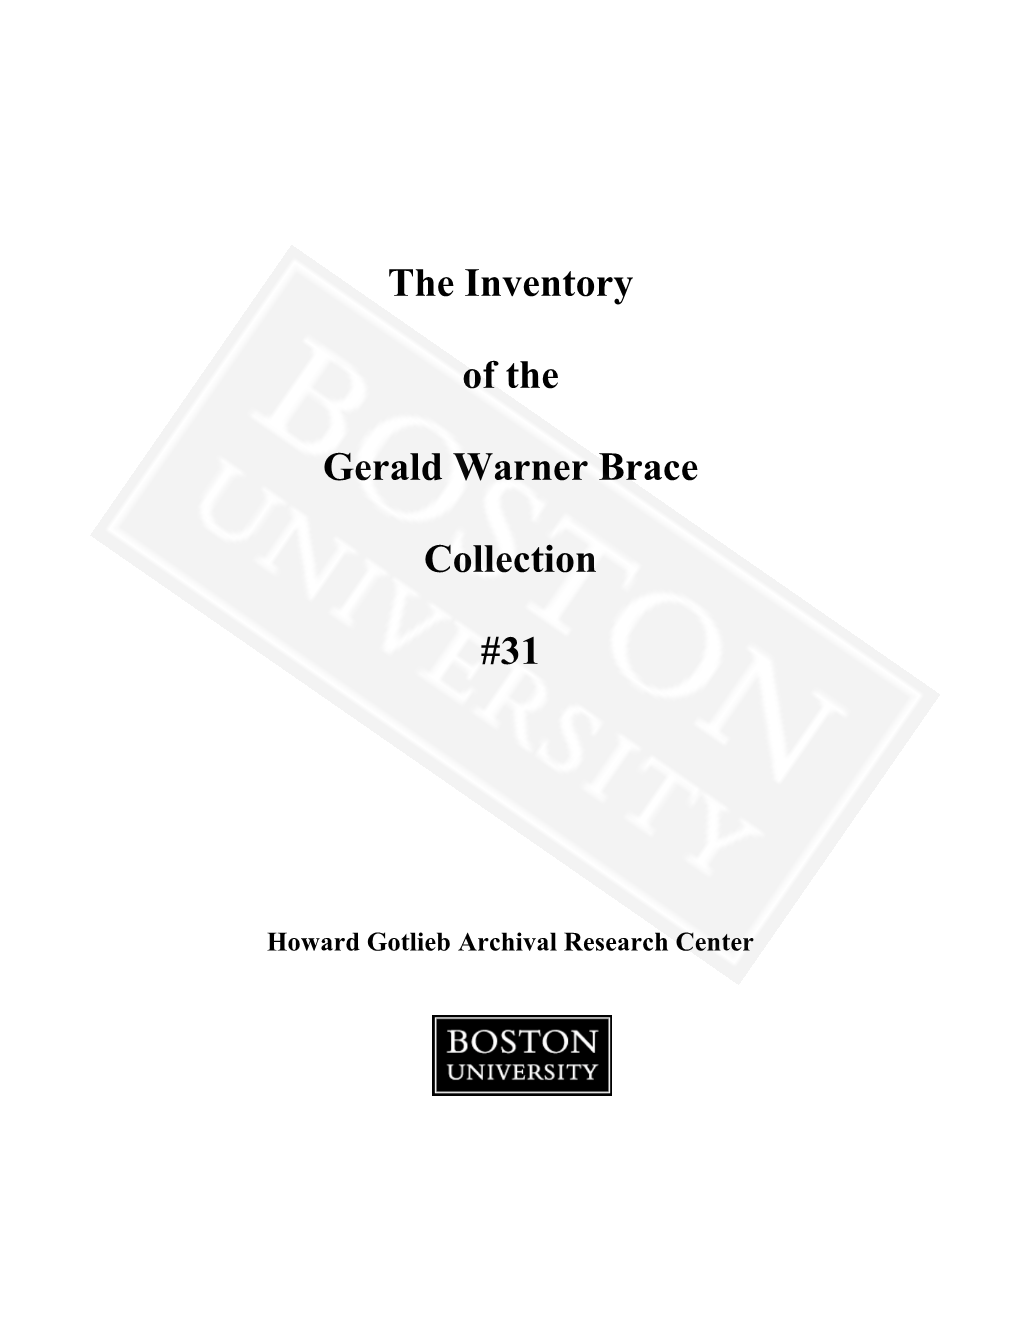 The Inventory of the Gerald Warner Brace Collection